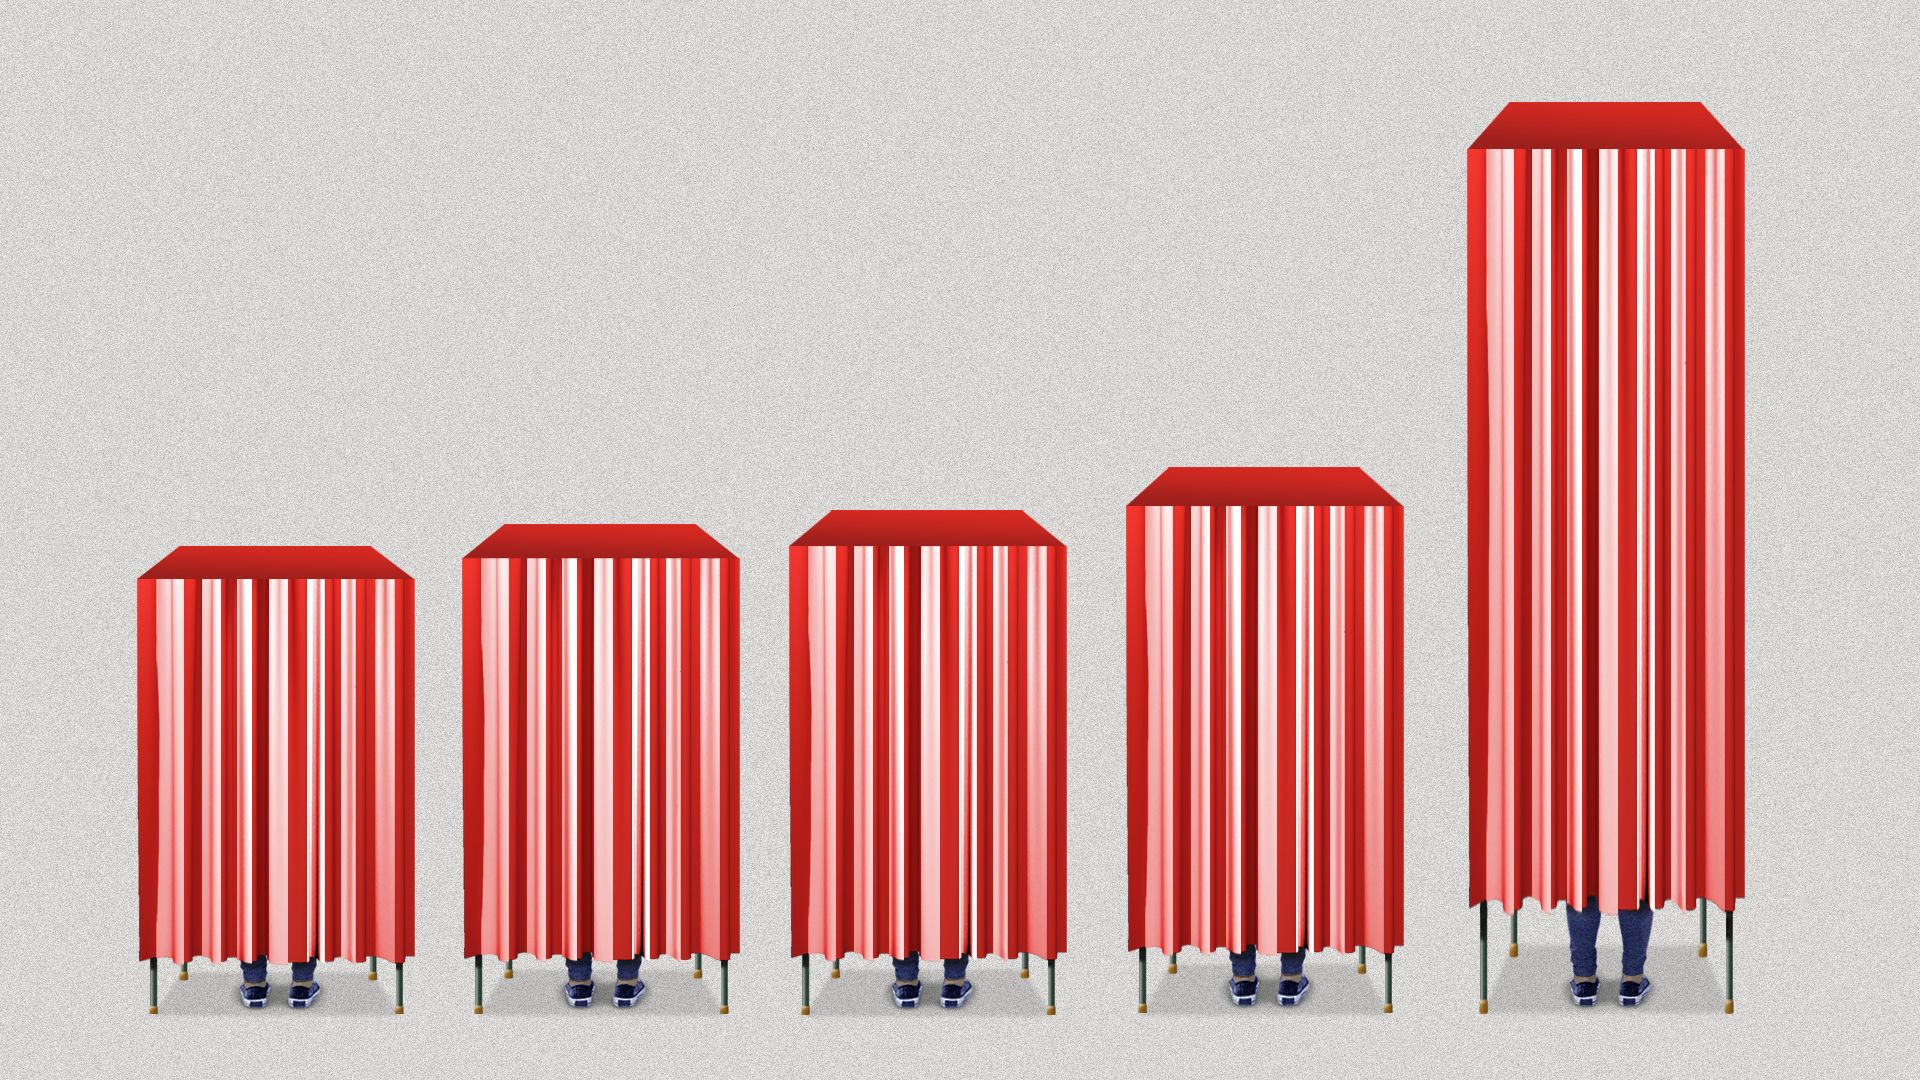 In this illustration, a series of voting booths get longer over time, like a bar chart.